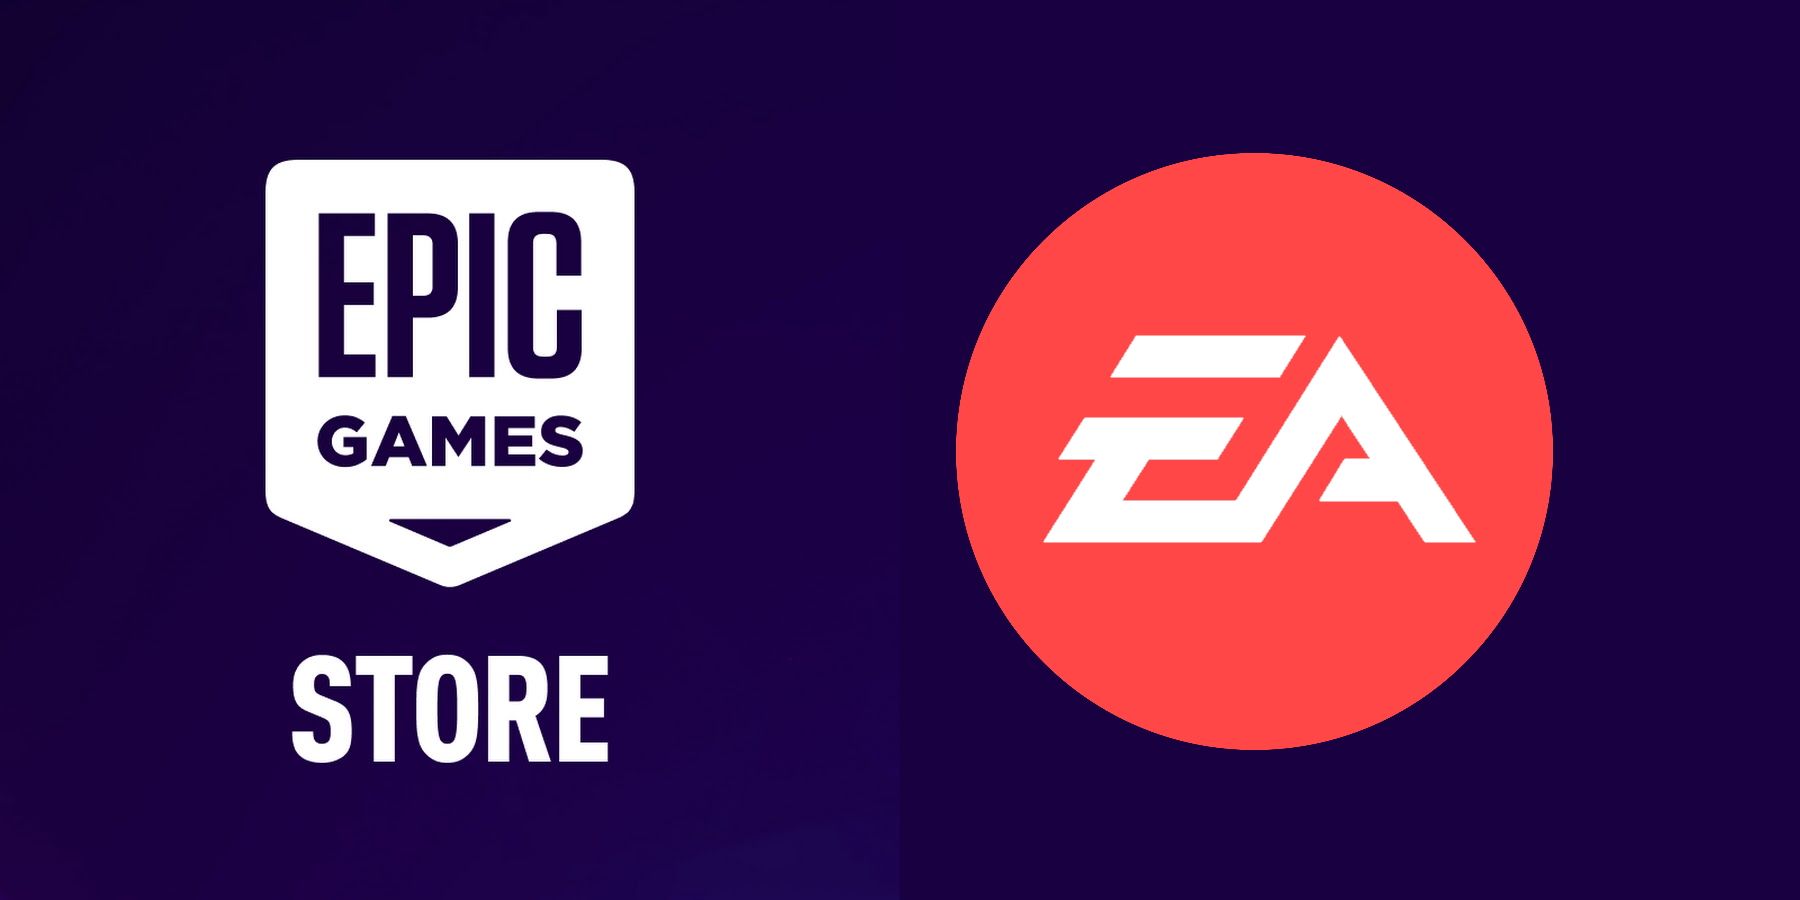 The logos for the Epic Games Store and EA, set against a purple background.